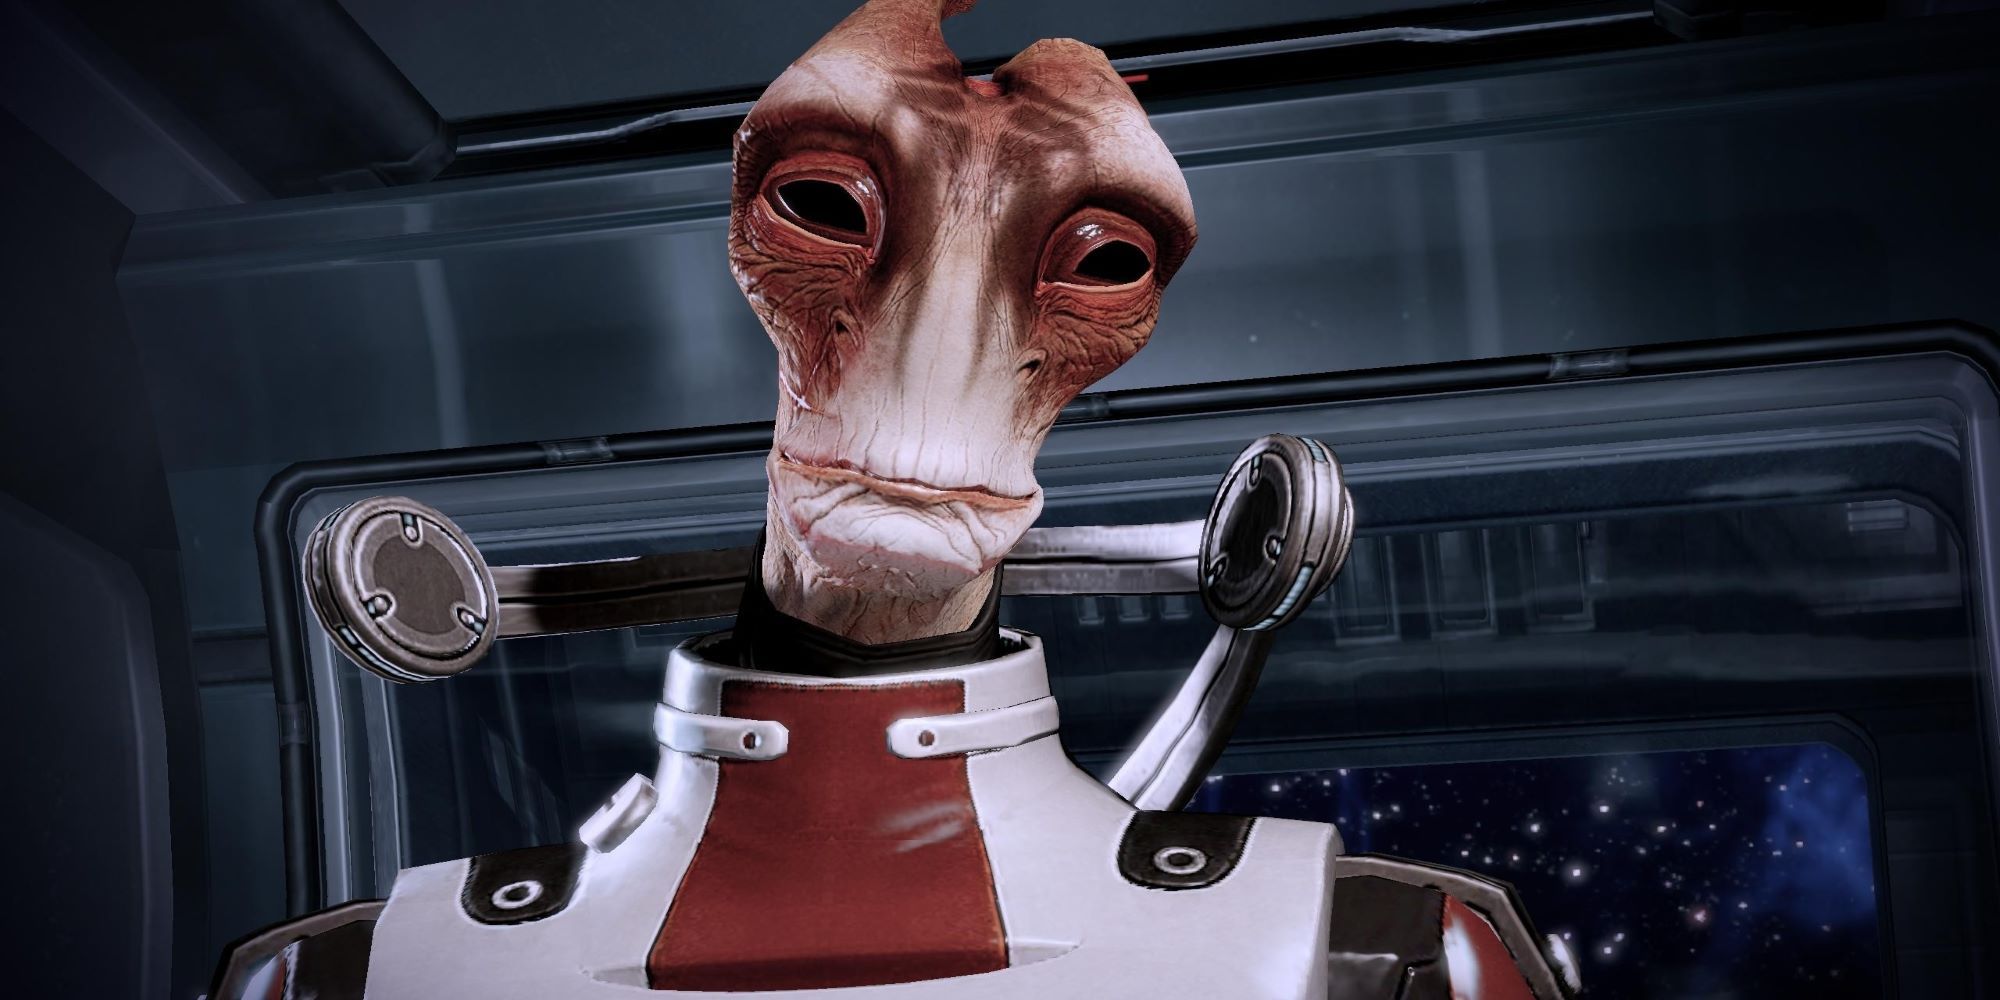 Mordin Solus Mass Effect 2 aboard the Normandy as he tries to save the Krogans